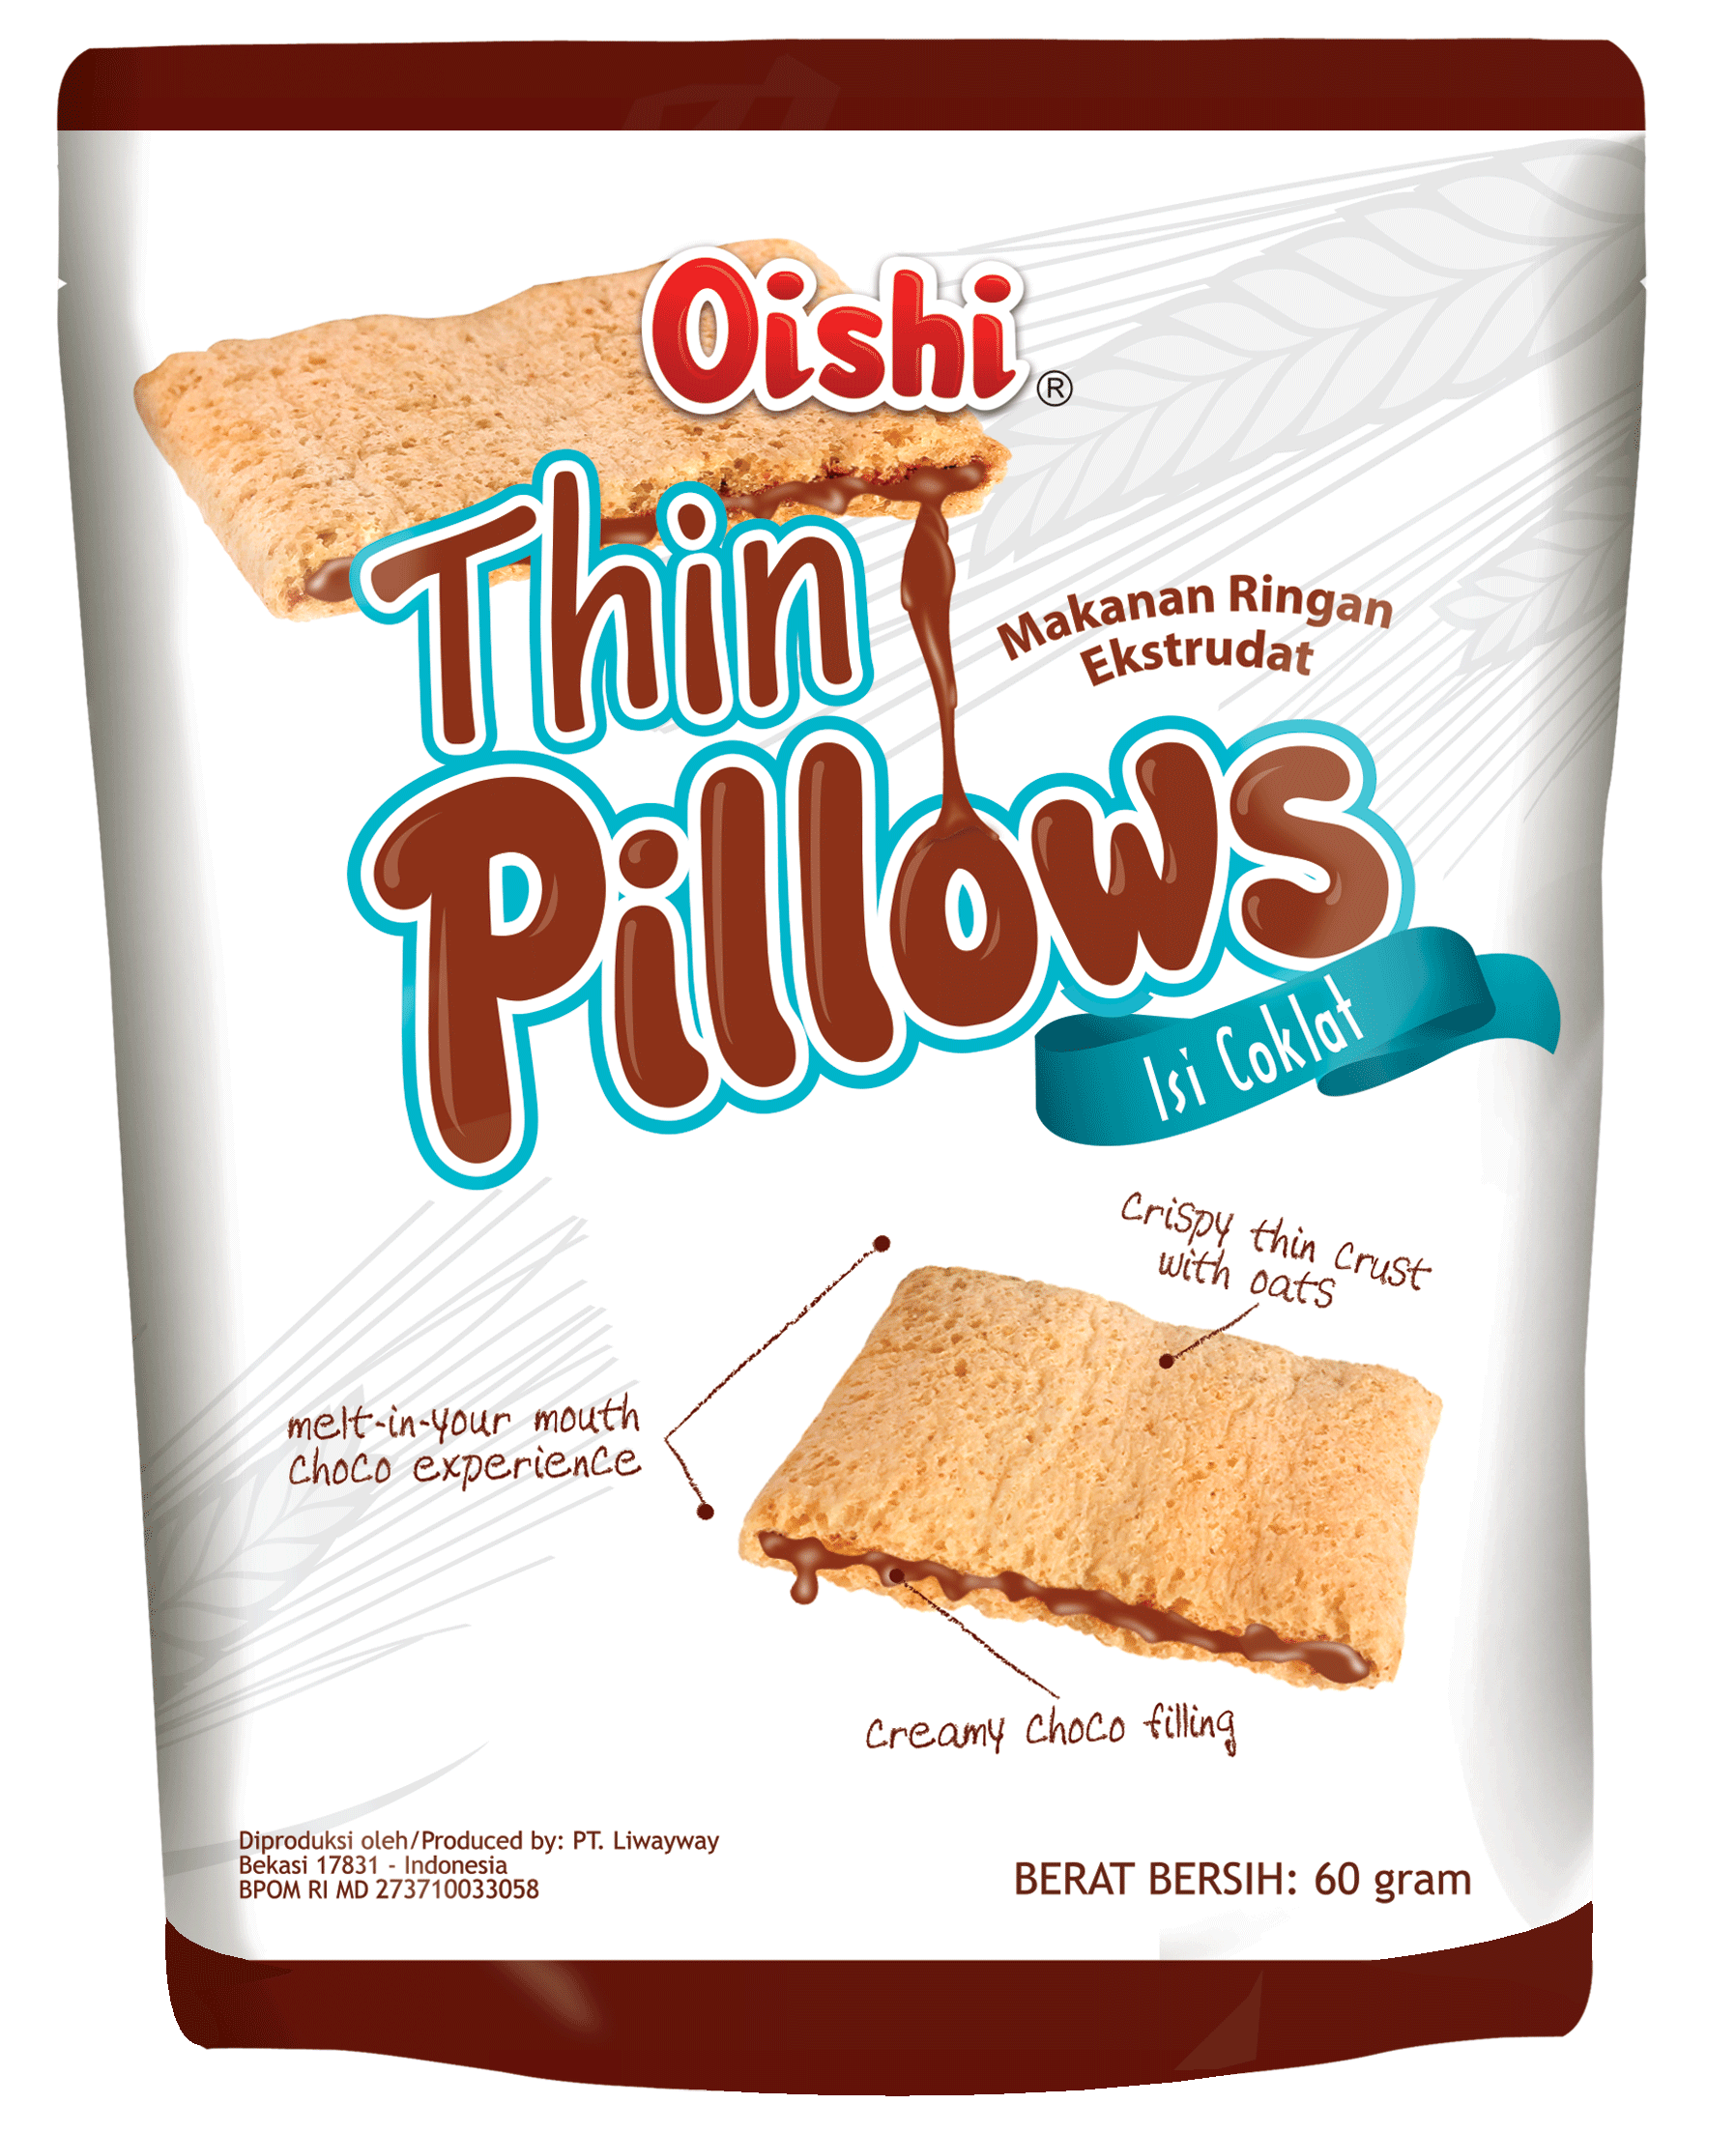 WS015 Oishi Thin Pillows | Swee's Group 